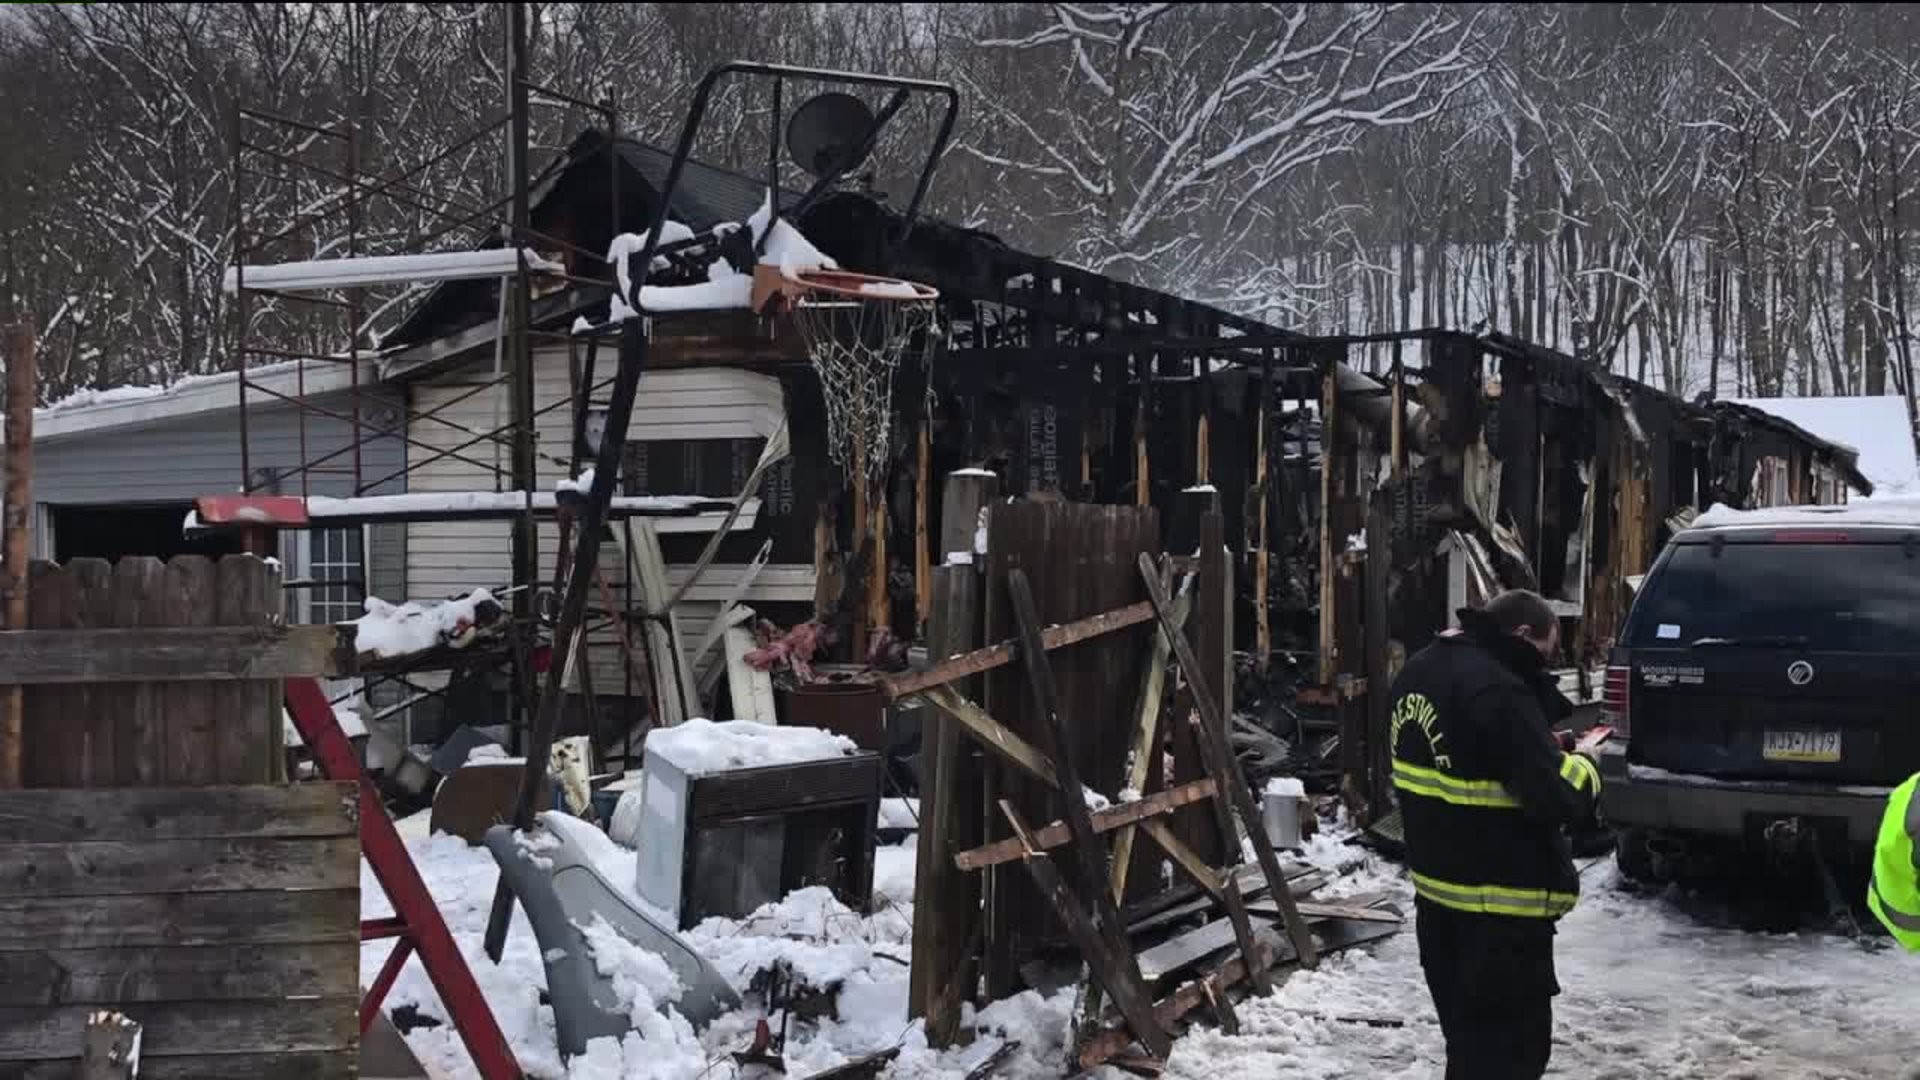 Dogs Escape Flames in Schuylkill County Home